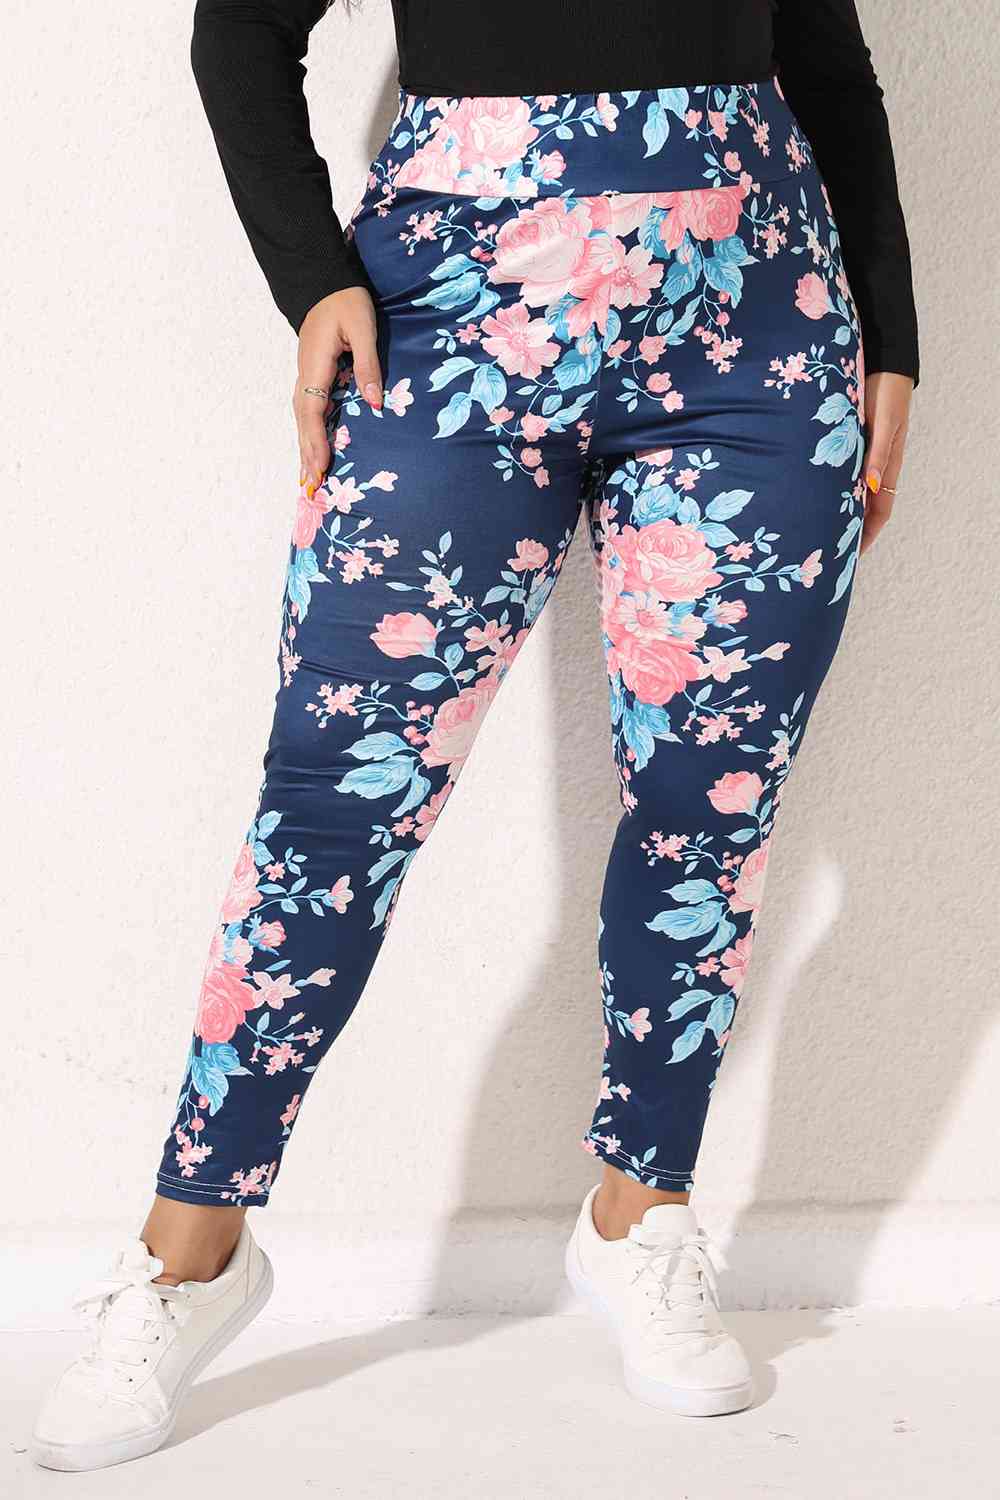 Plus Size Floral Print Legging Print on any thing USA/STOD clothes